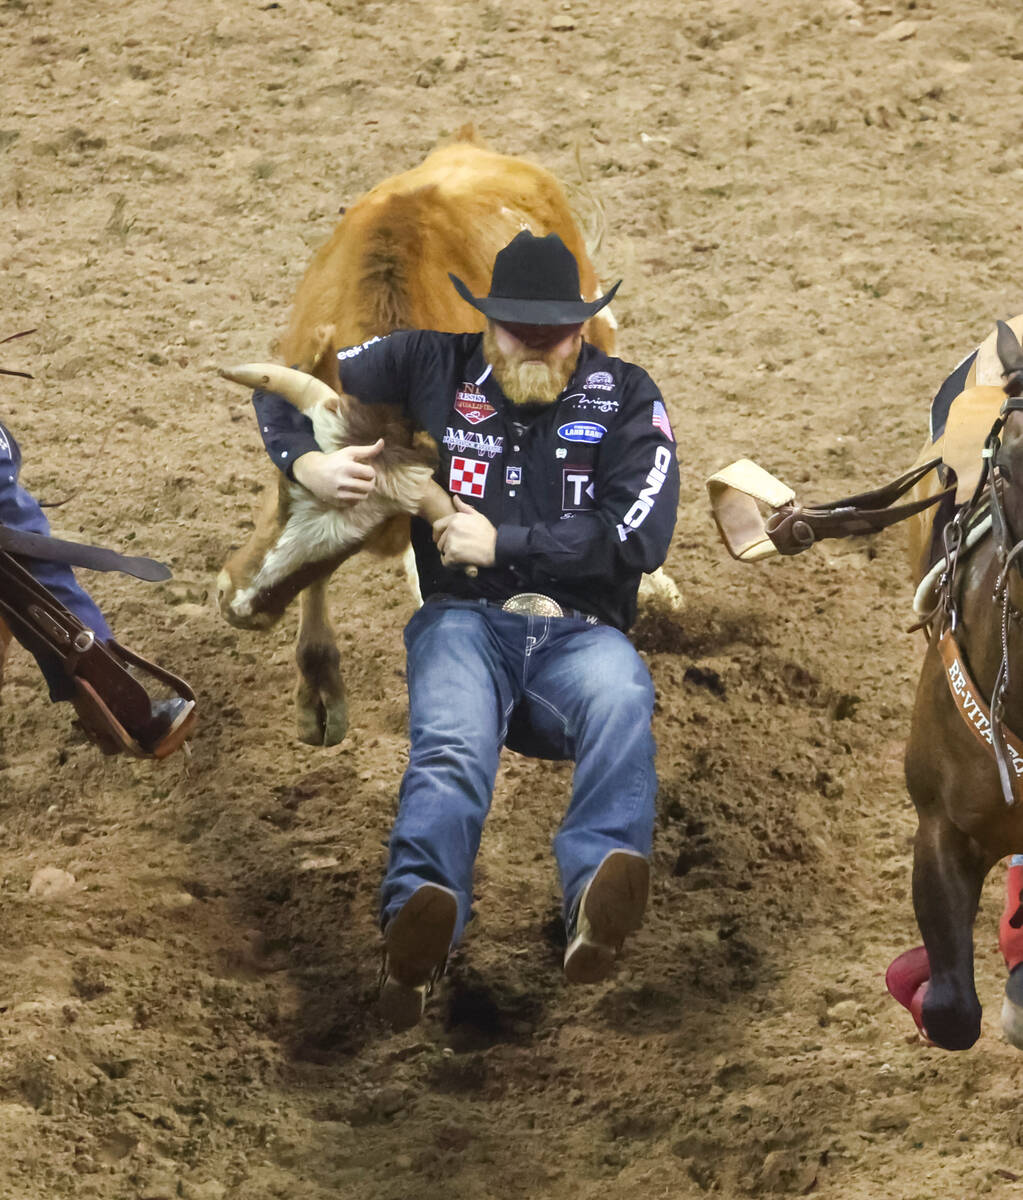 Will Lummus, of Byhalia, Miss., competes in steer wrestling during the first night of the Natio ...